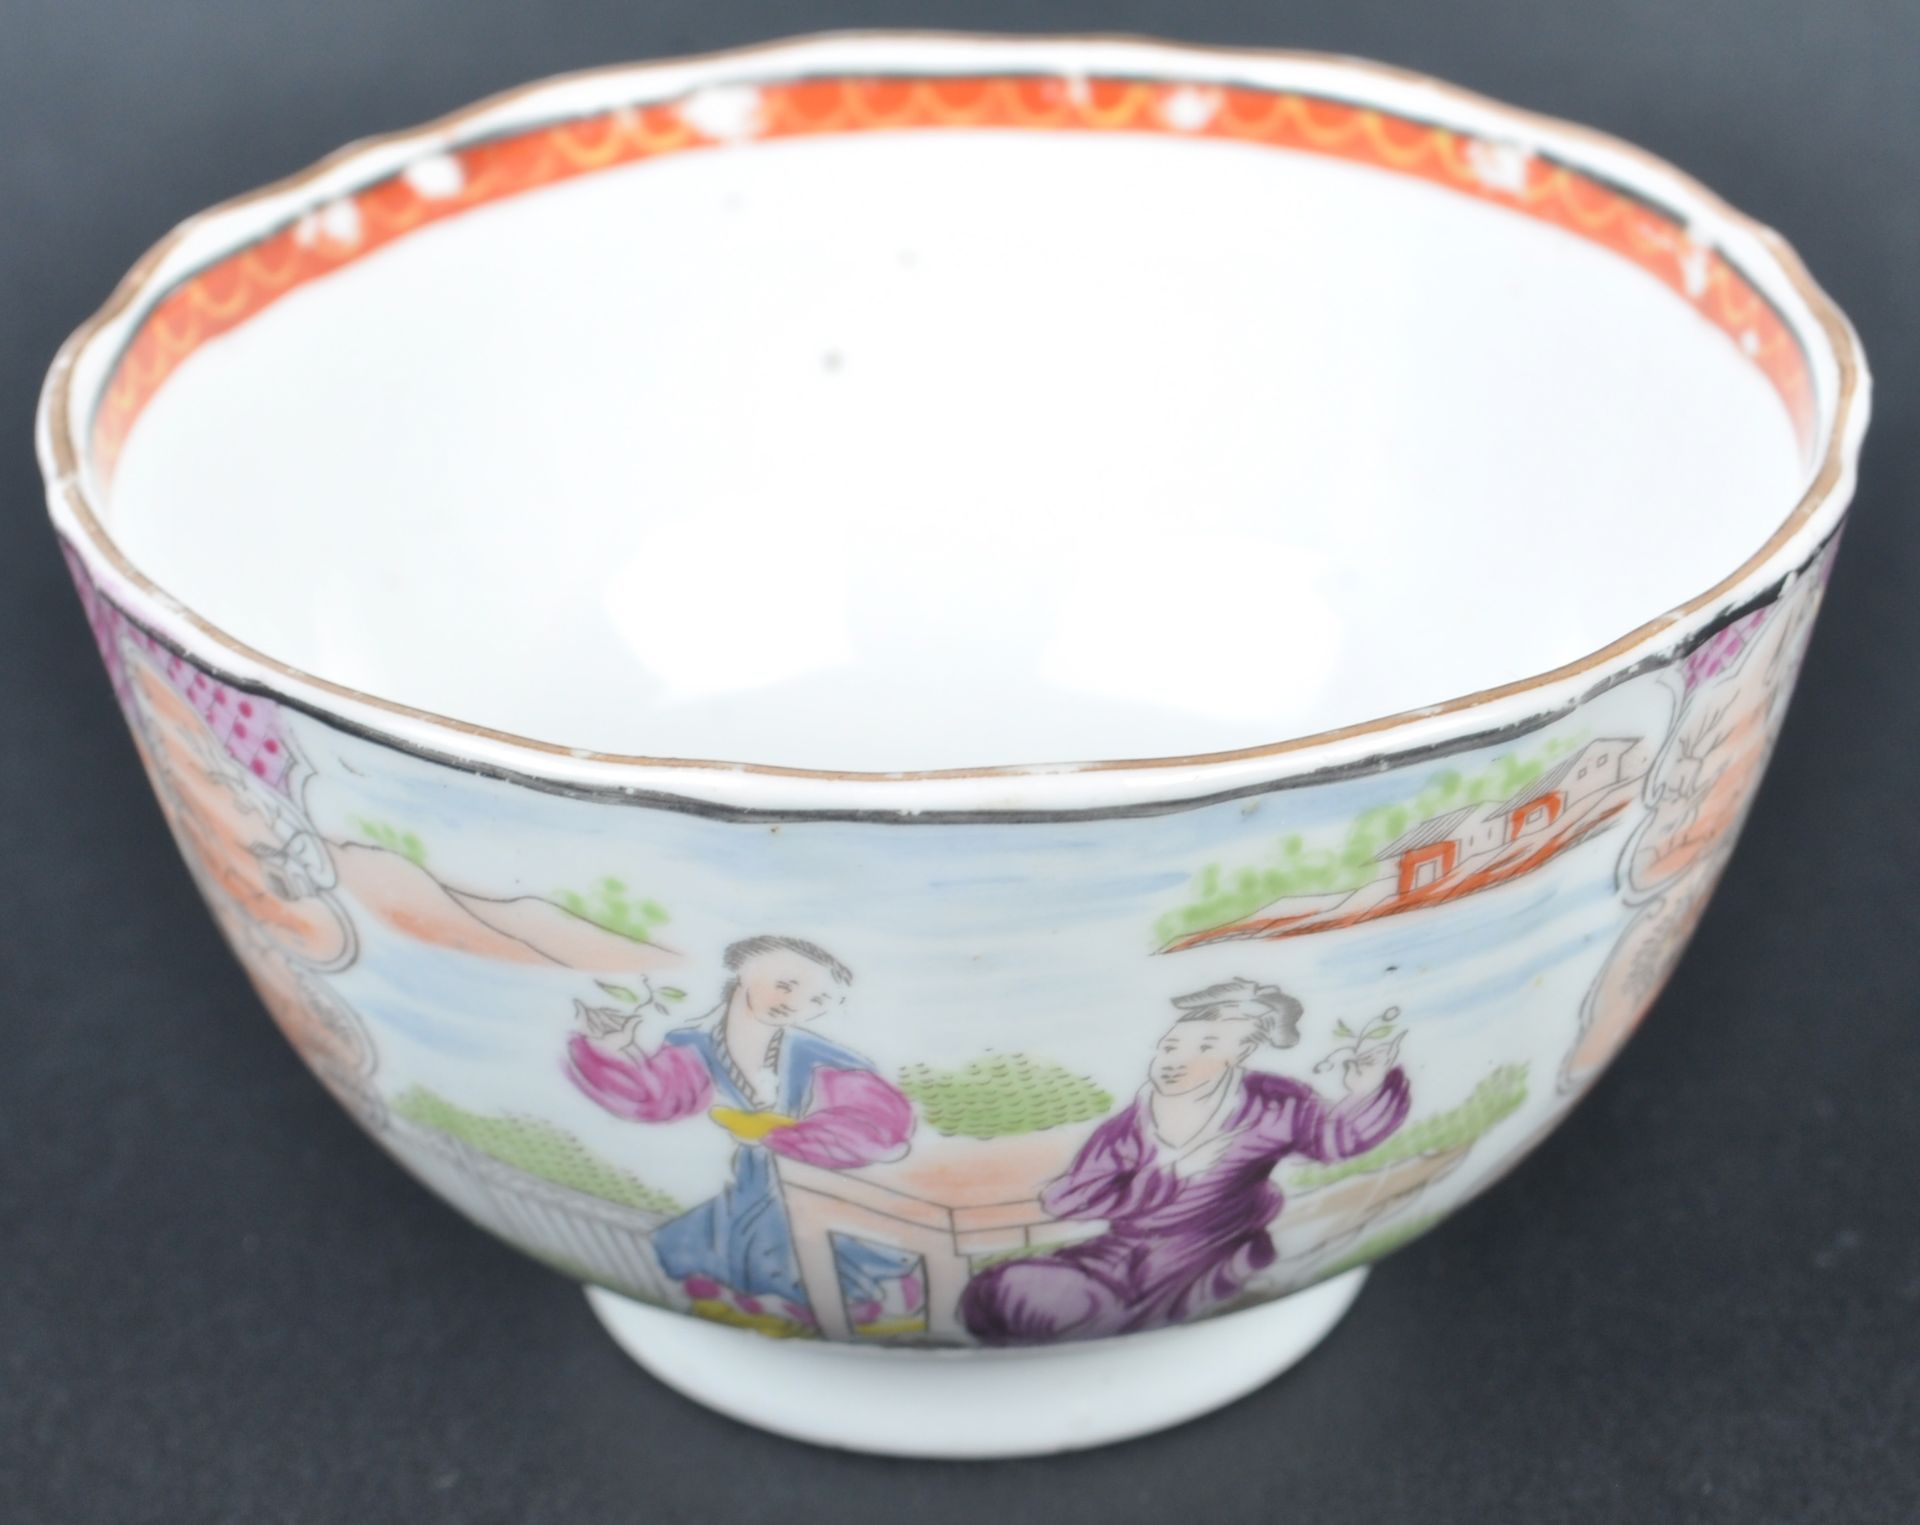 19TH CENTURY CHINESE EXPORT PORCELAIN TEACUP - Image 2 of 4